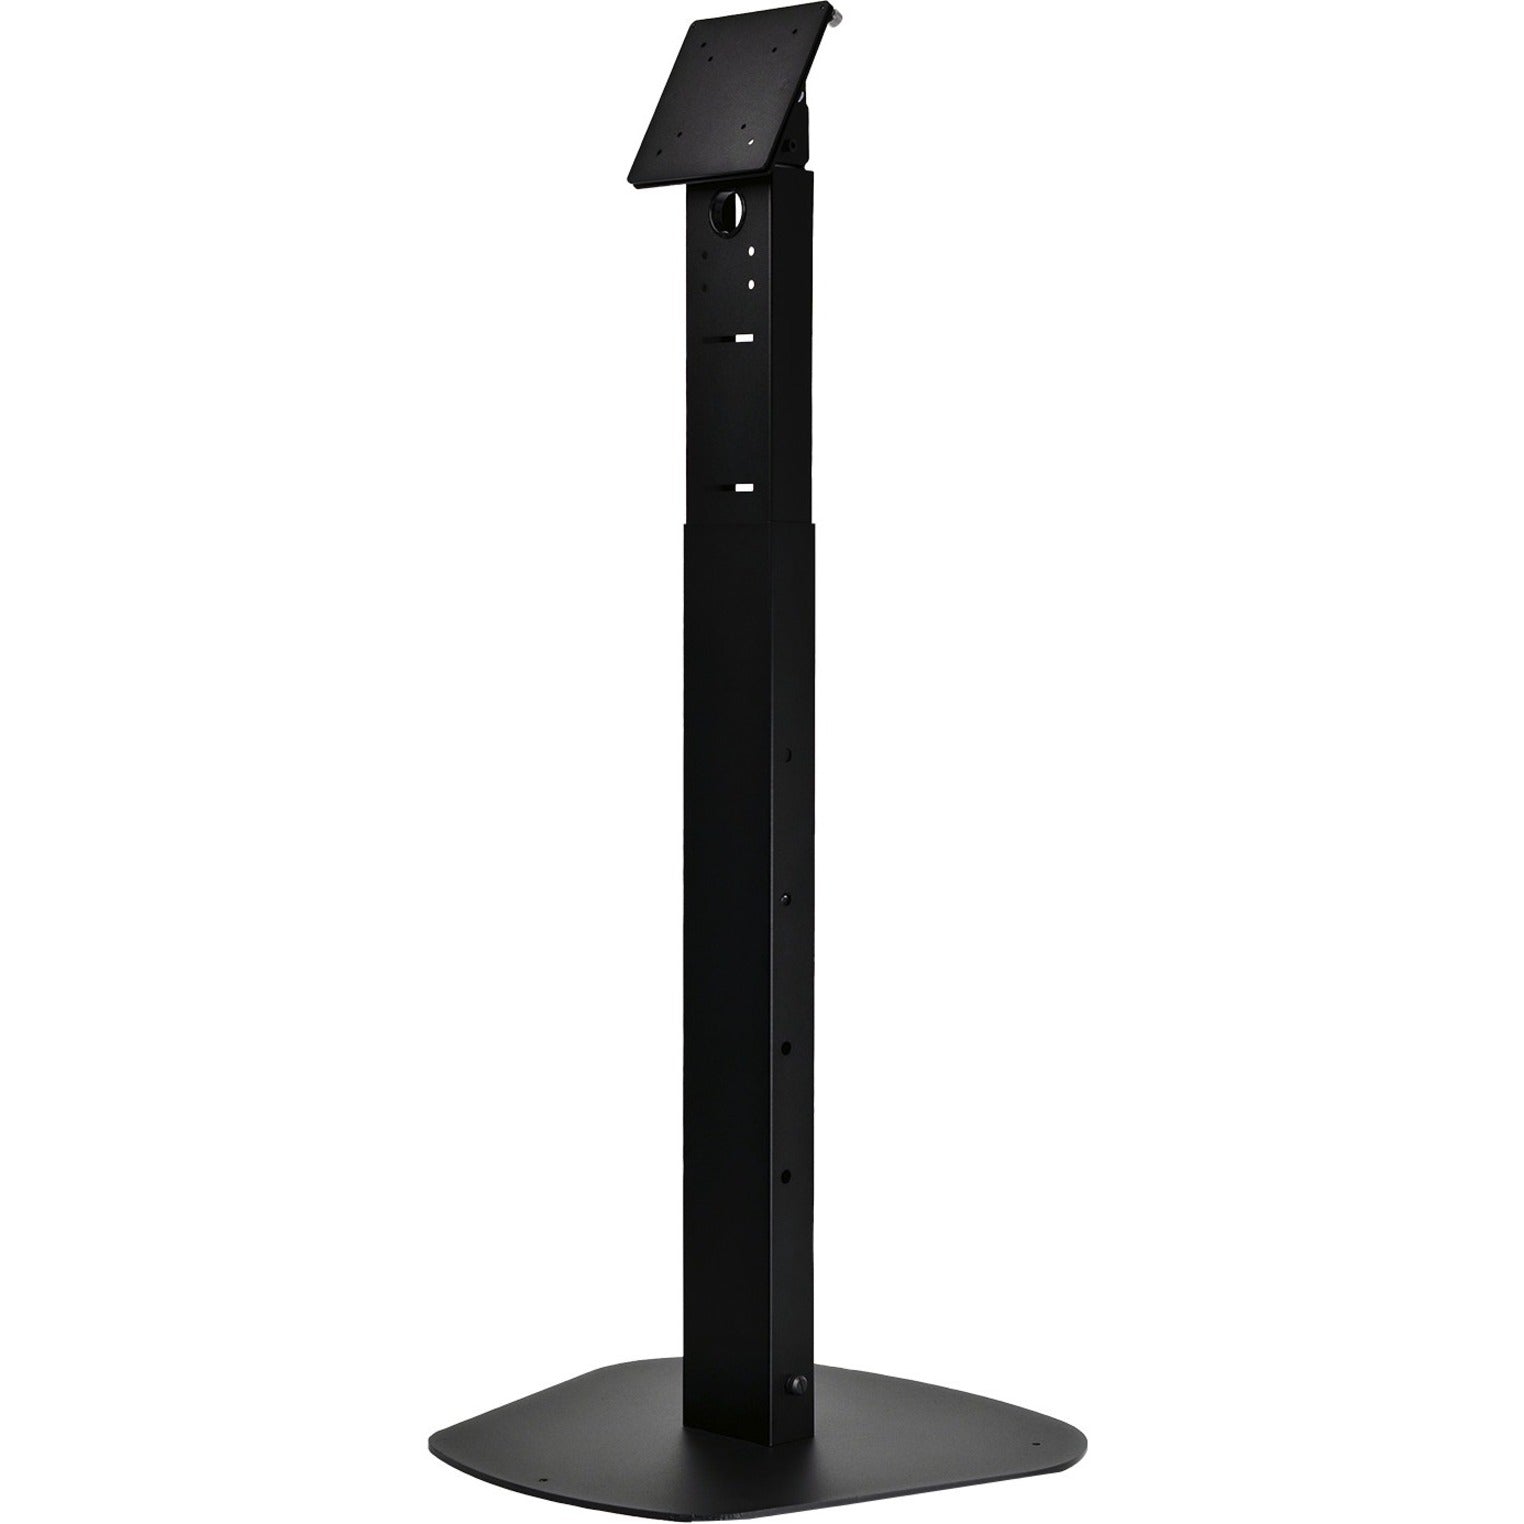 ViewSonic STND-042 Commercial-Grade Kiosk Stand, Adjustable Height, Pivot, Heavy Duty, Cable Management